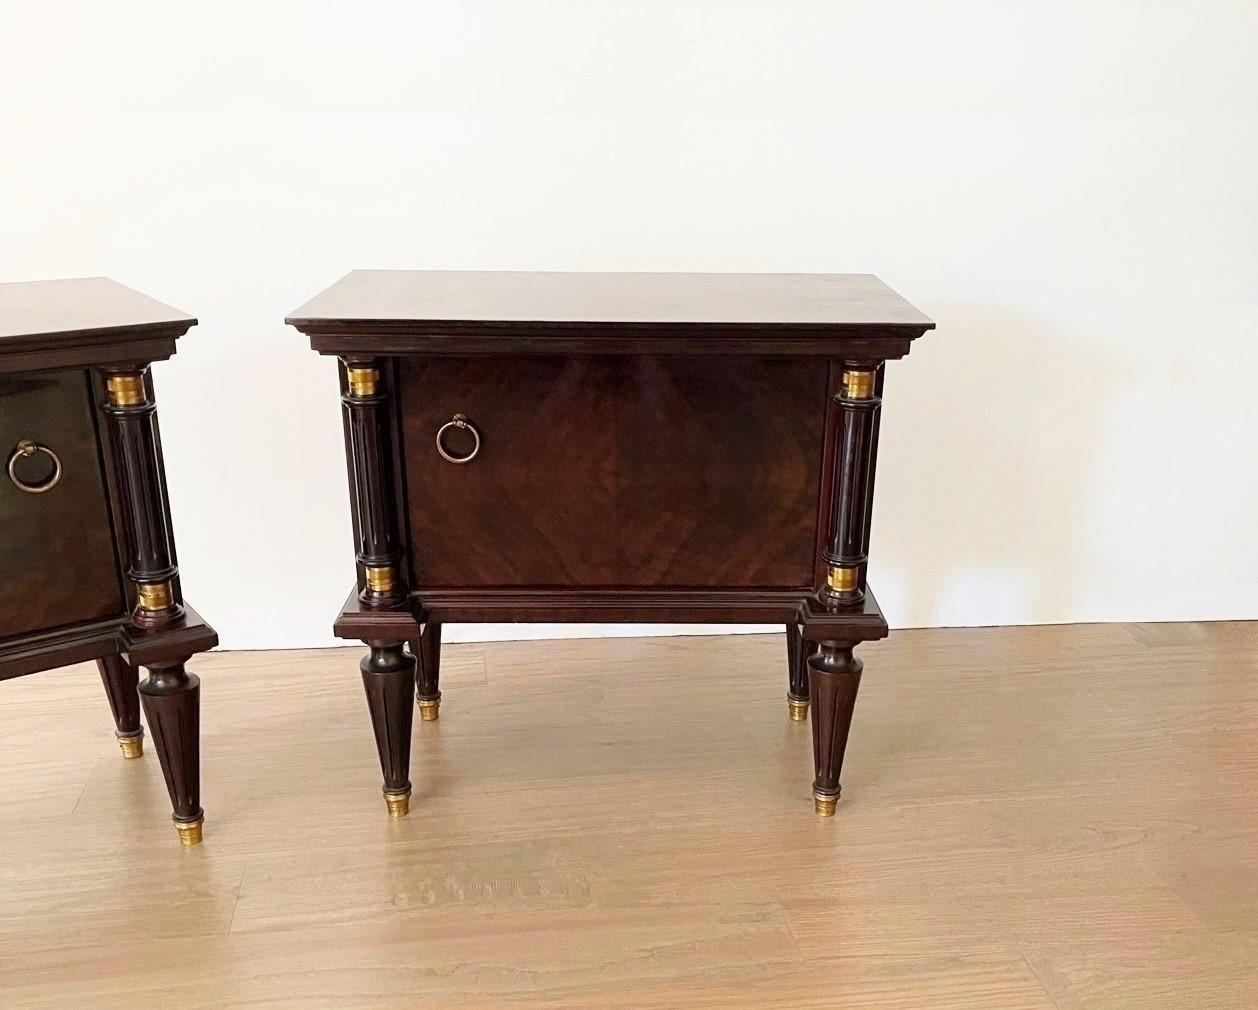 Early 20th Century Italian Neoclassical Pair of Bedside Tables in Mahogany In Good Condition For Sale In Dallas, TX